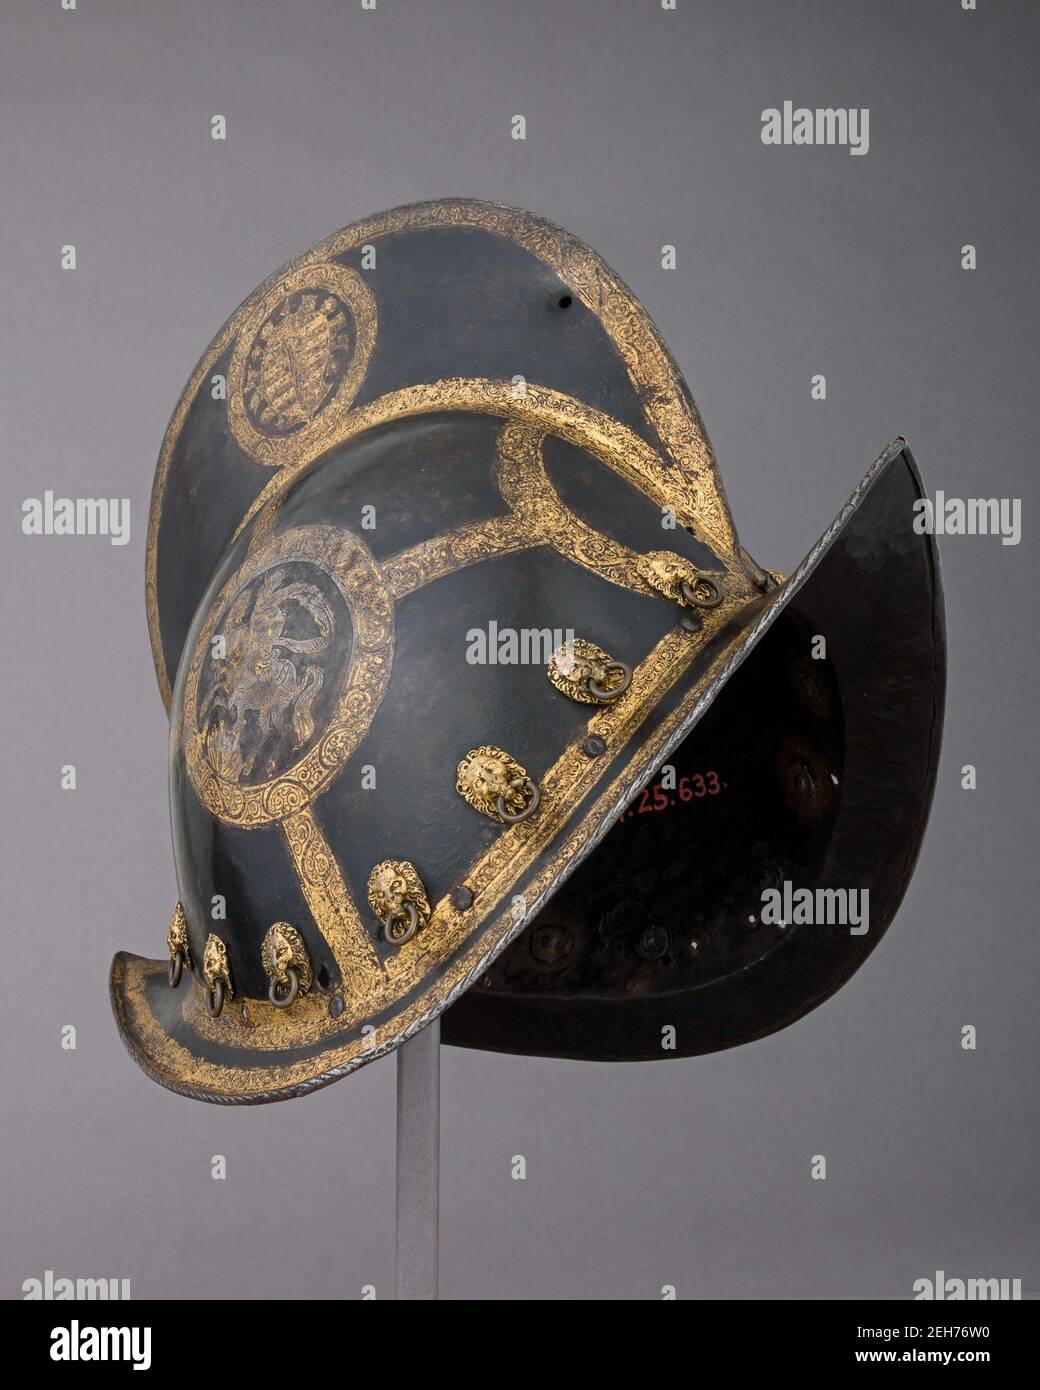 Morion for the Bodyguard of the Prince-Elector of Saxony, German, Nuremberg, ca. 1570. Stock Photo